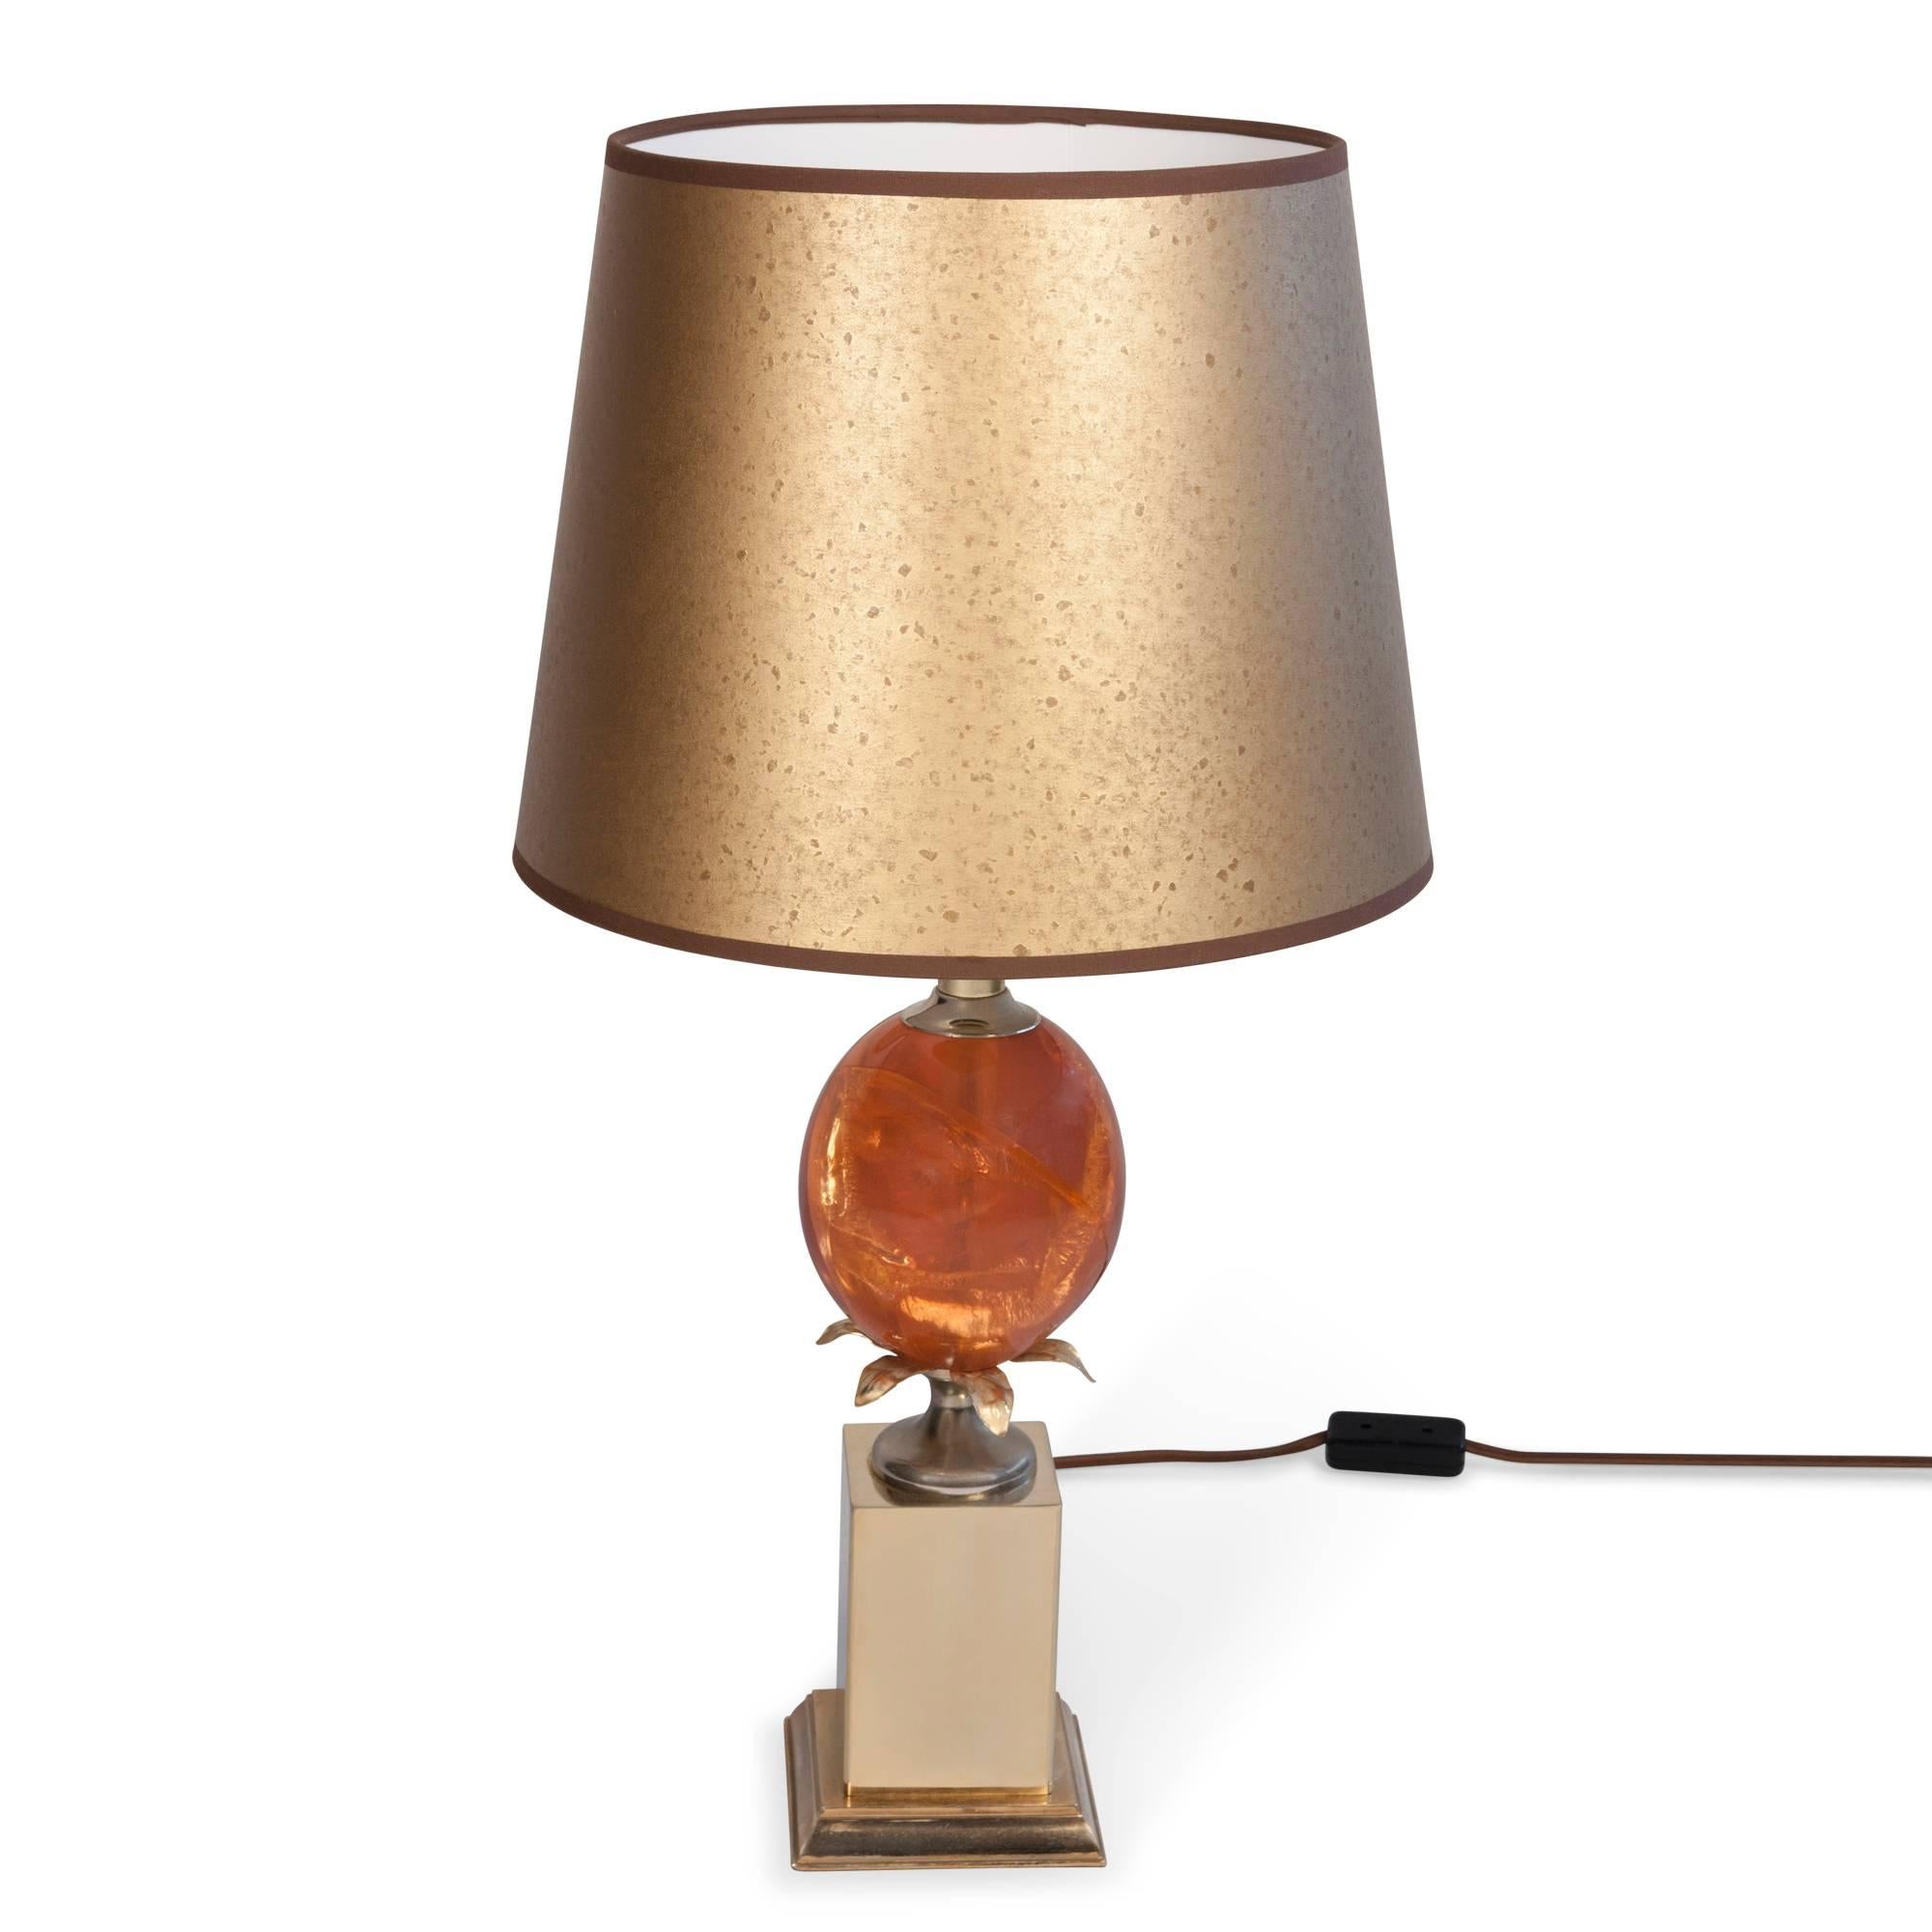 Mid-Century Modern Fractured Resin Table Lamp, French, 1970s For Sale